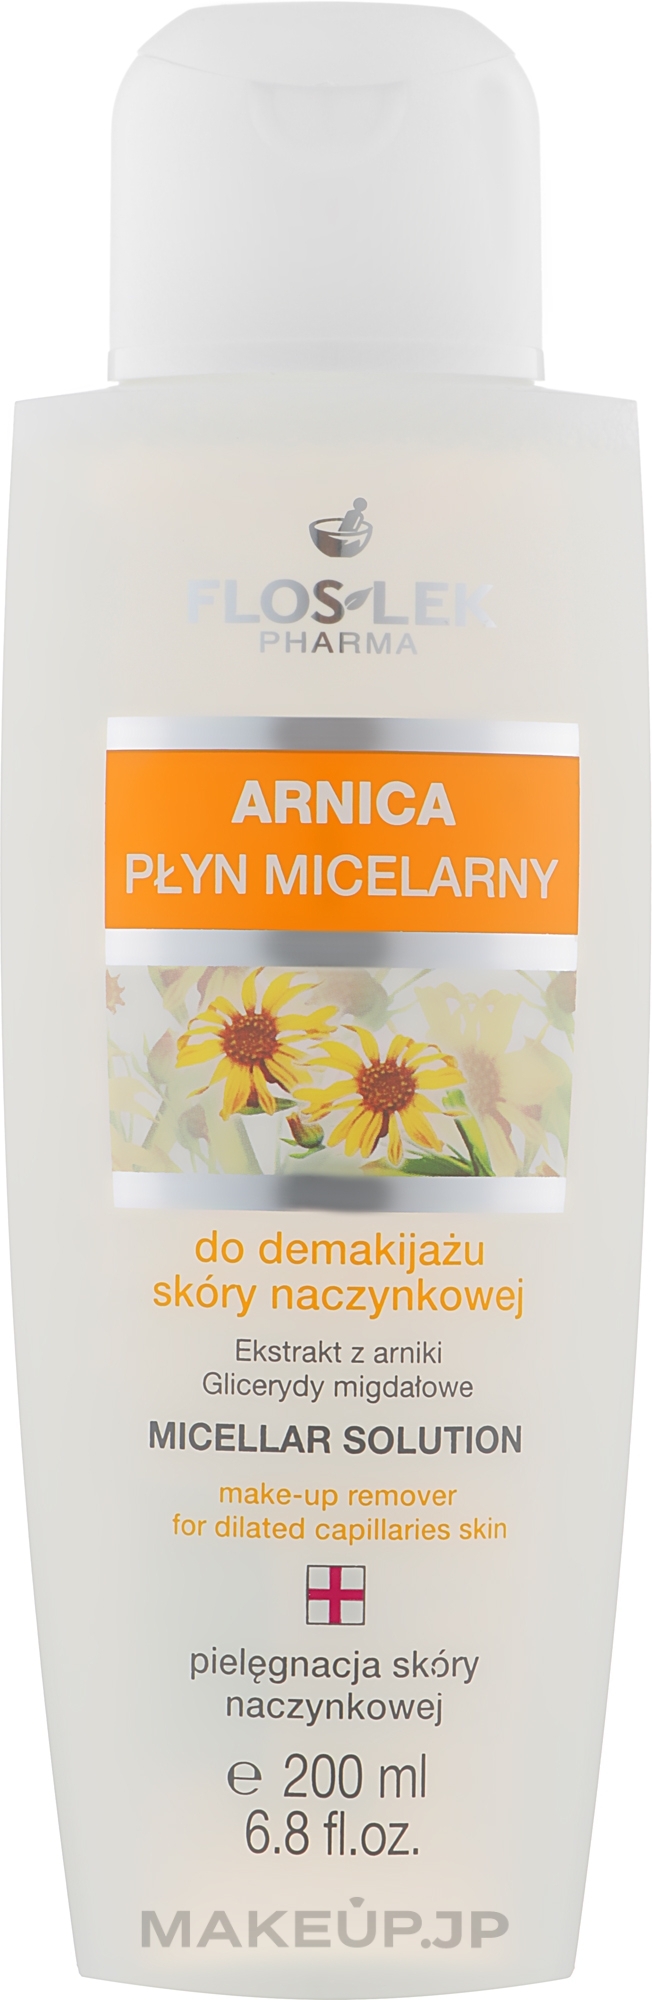 Micellar Makeup Remover "Arnica" for Skin Prone to Dilated Capillaries - Floslek Micellar Solution Make-Up Remover For Dilated Capillaries Skin — photo 200 ml